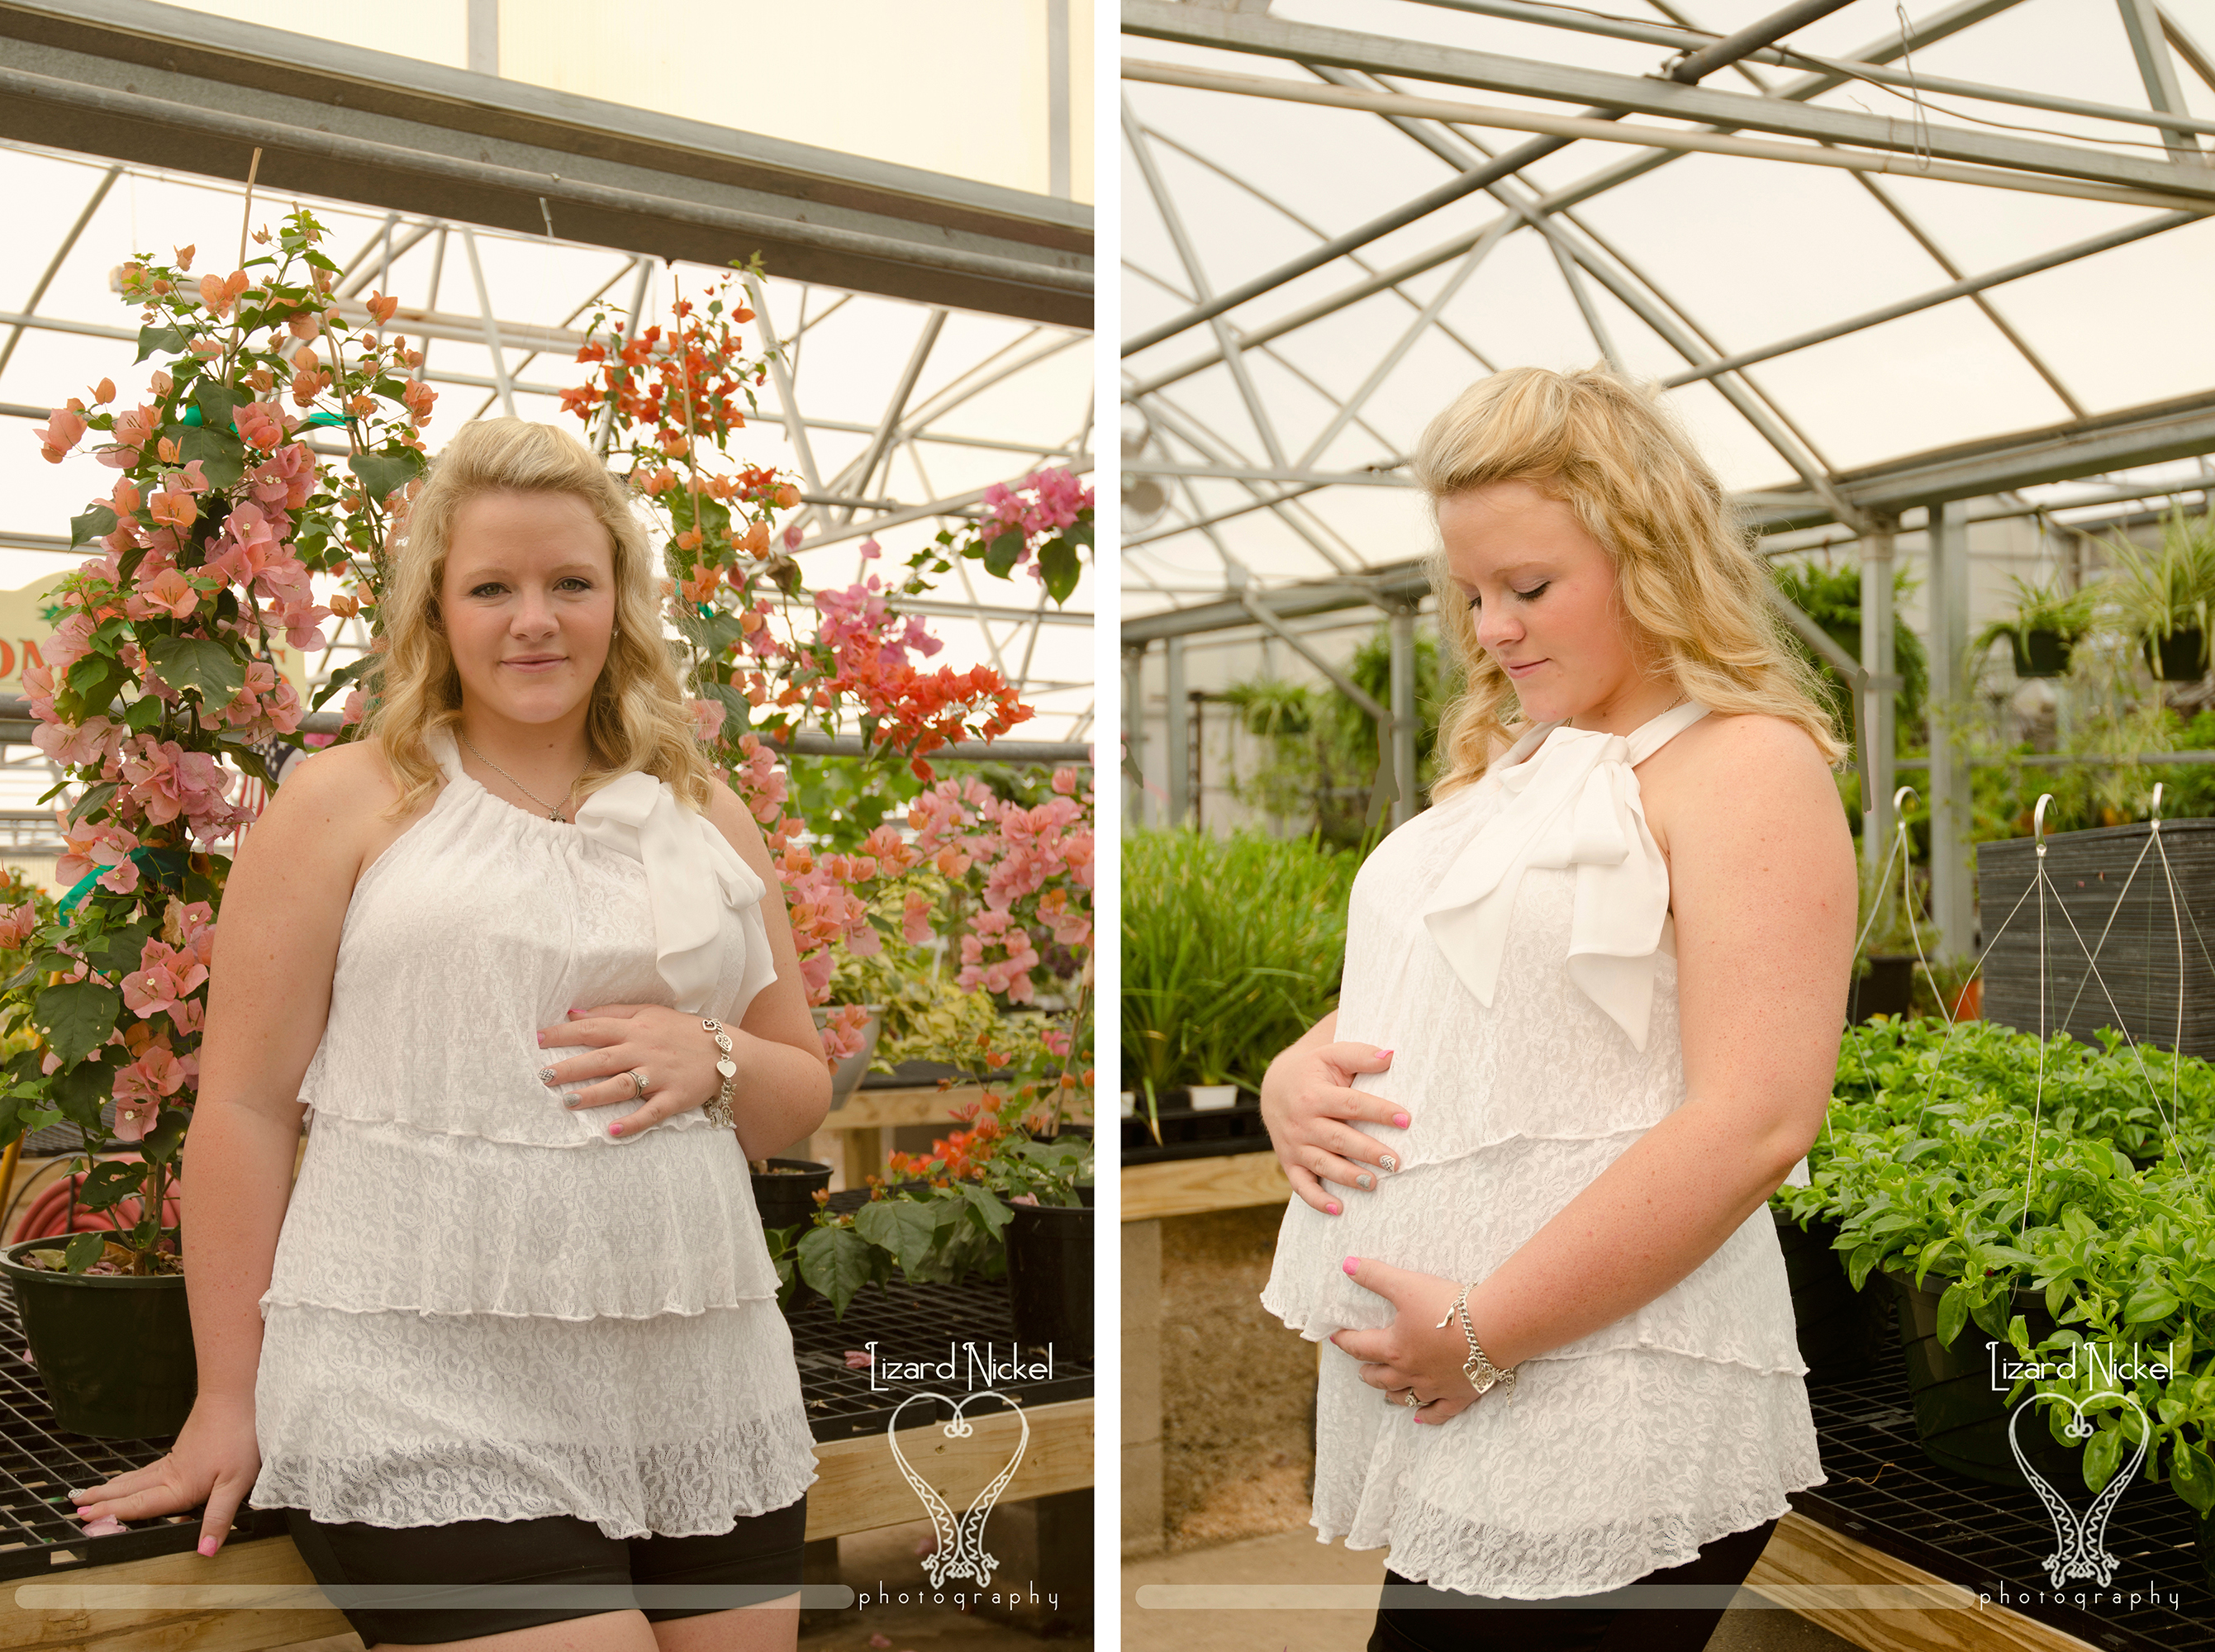 Amazing Maternity Pictures 2